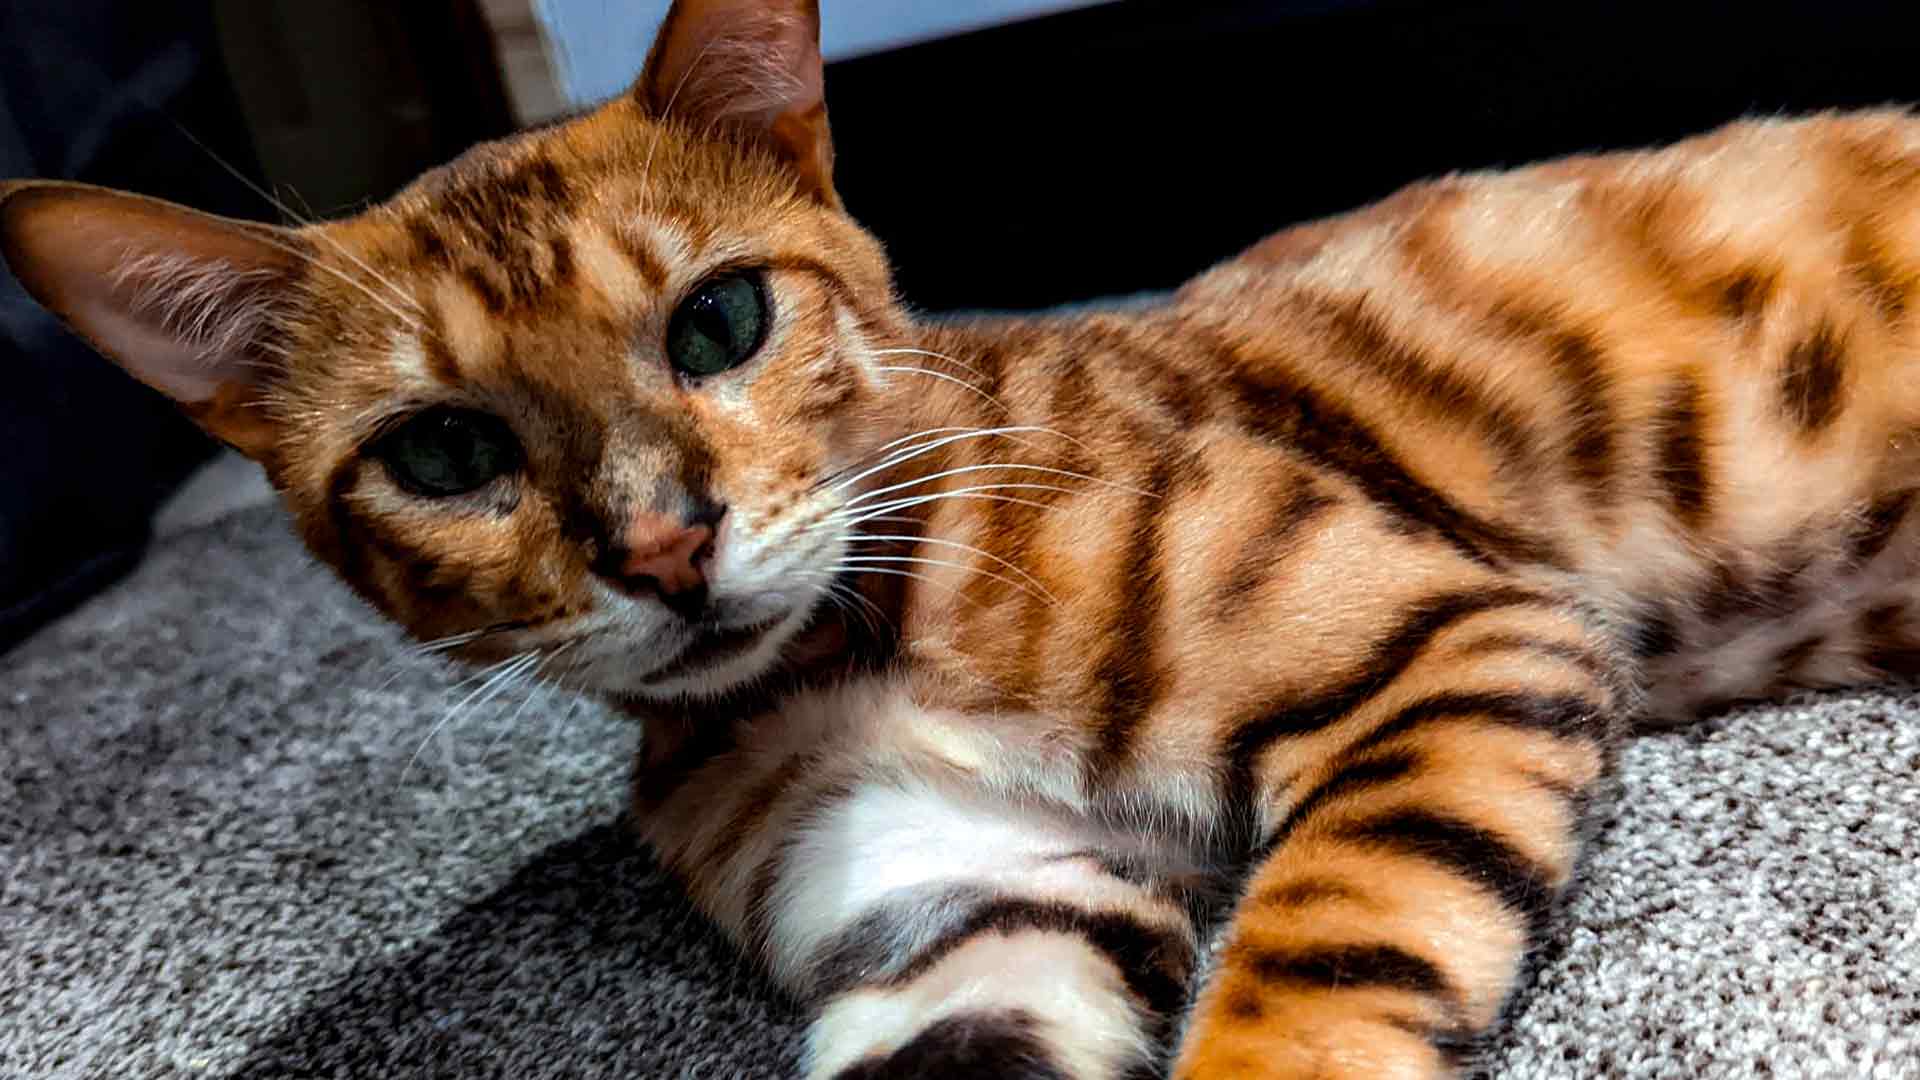 Bengal cat with beautiful spotted coat, known for being potentially less allergenic than other cat breeds.